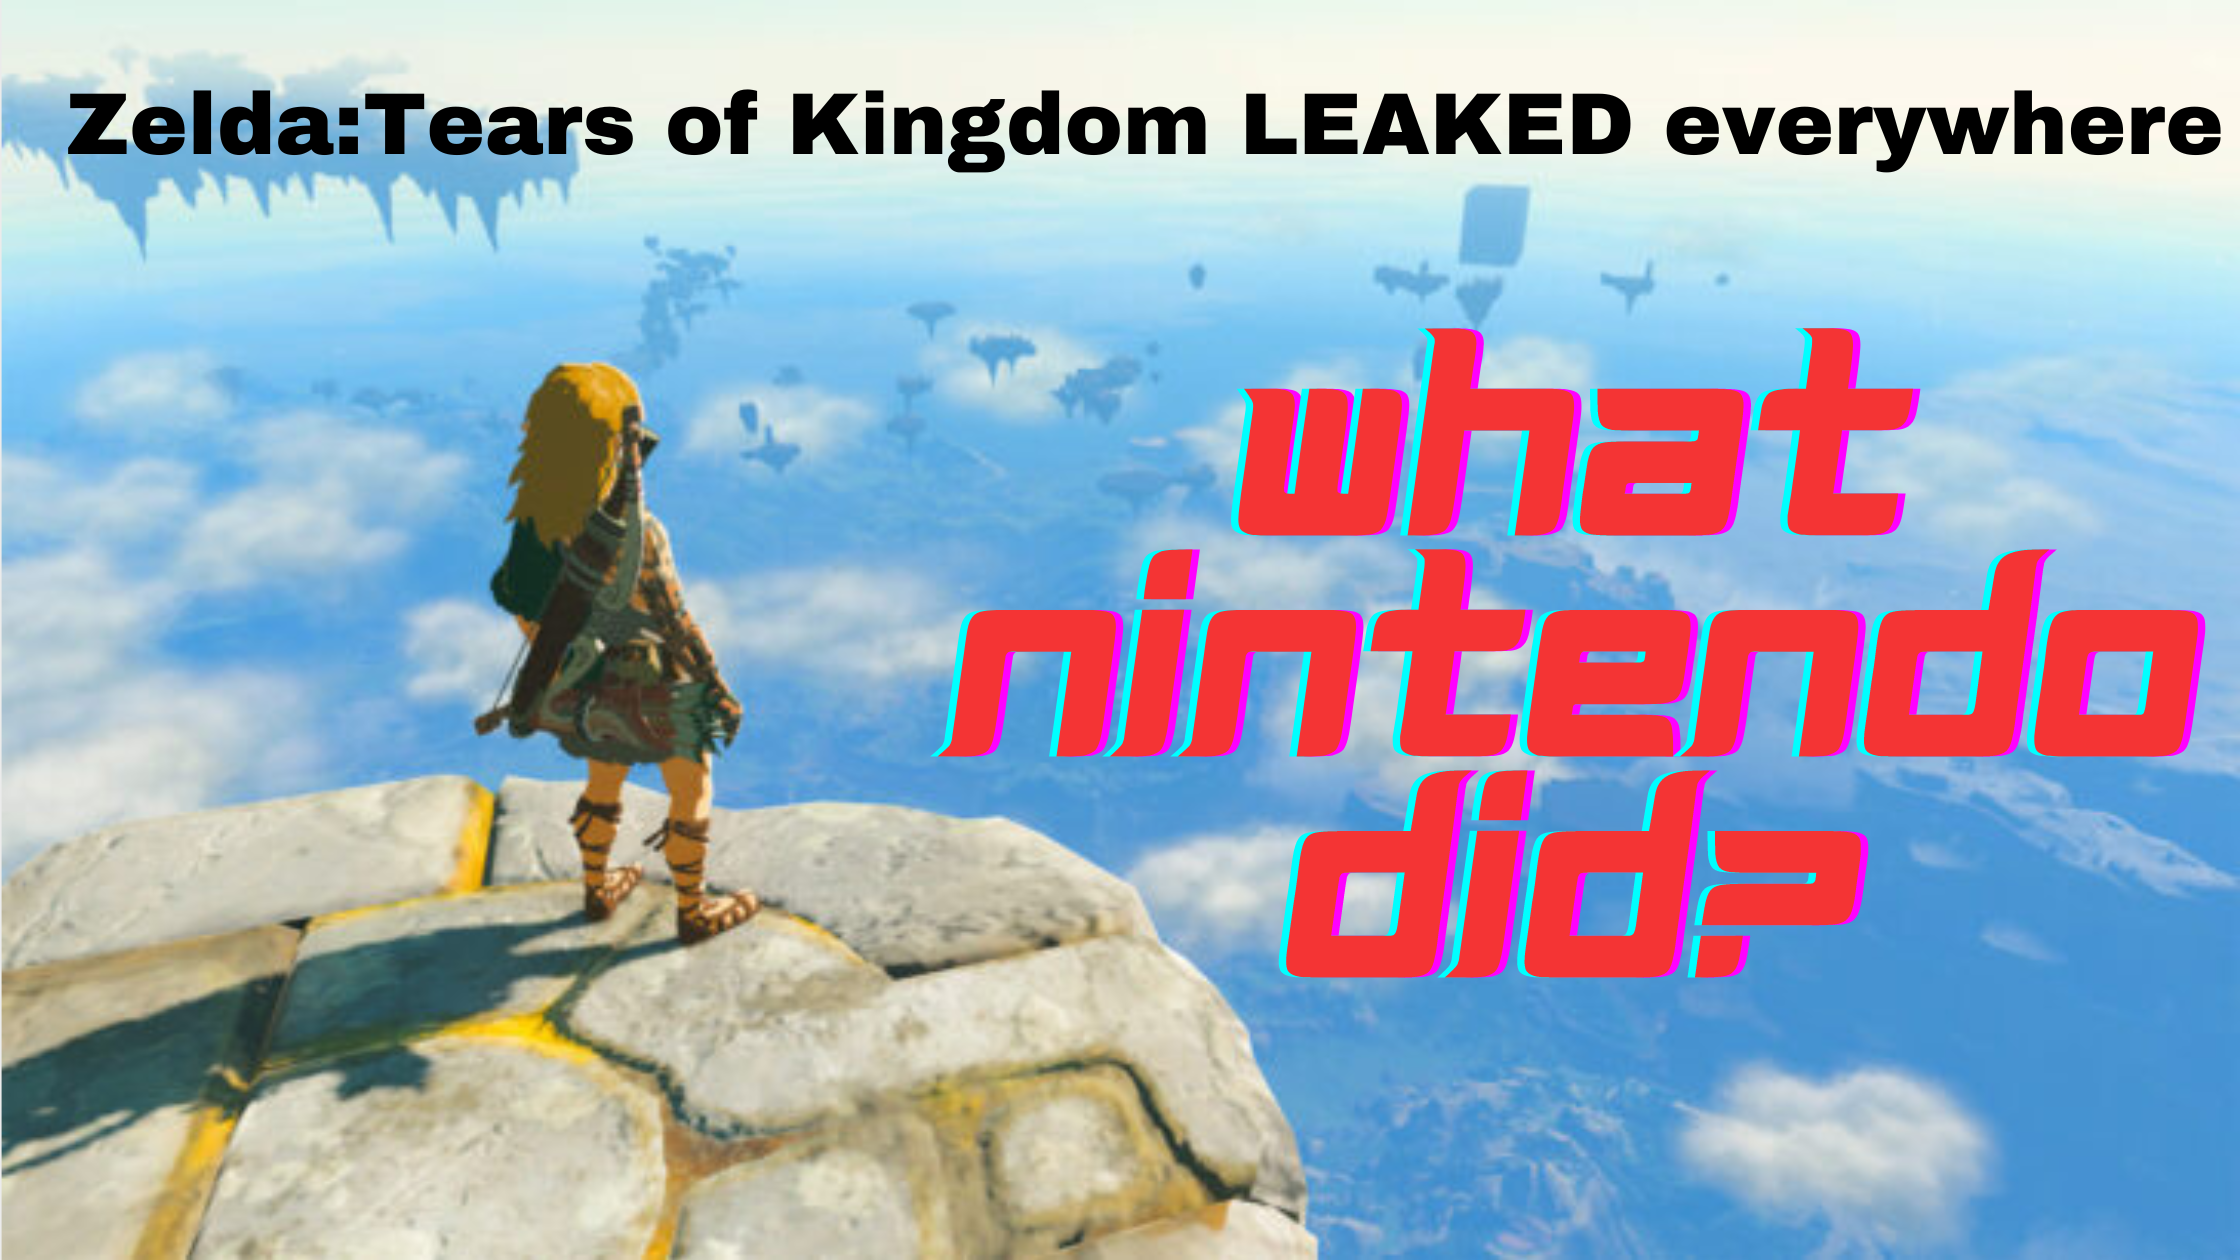 What Nintendo did about the problem Zelda:Tears of Kingdom Has LEAKED?